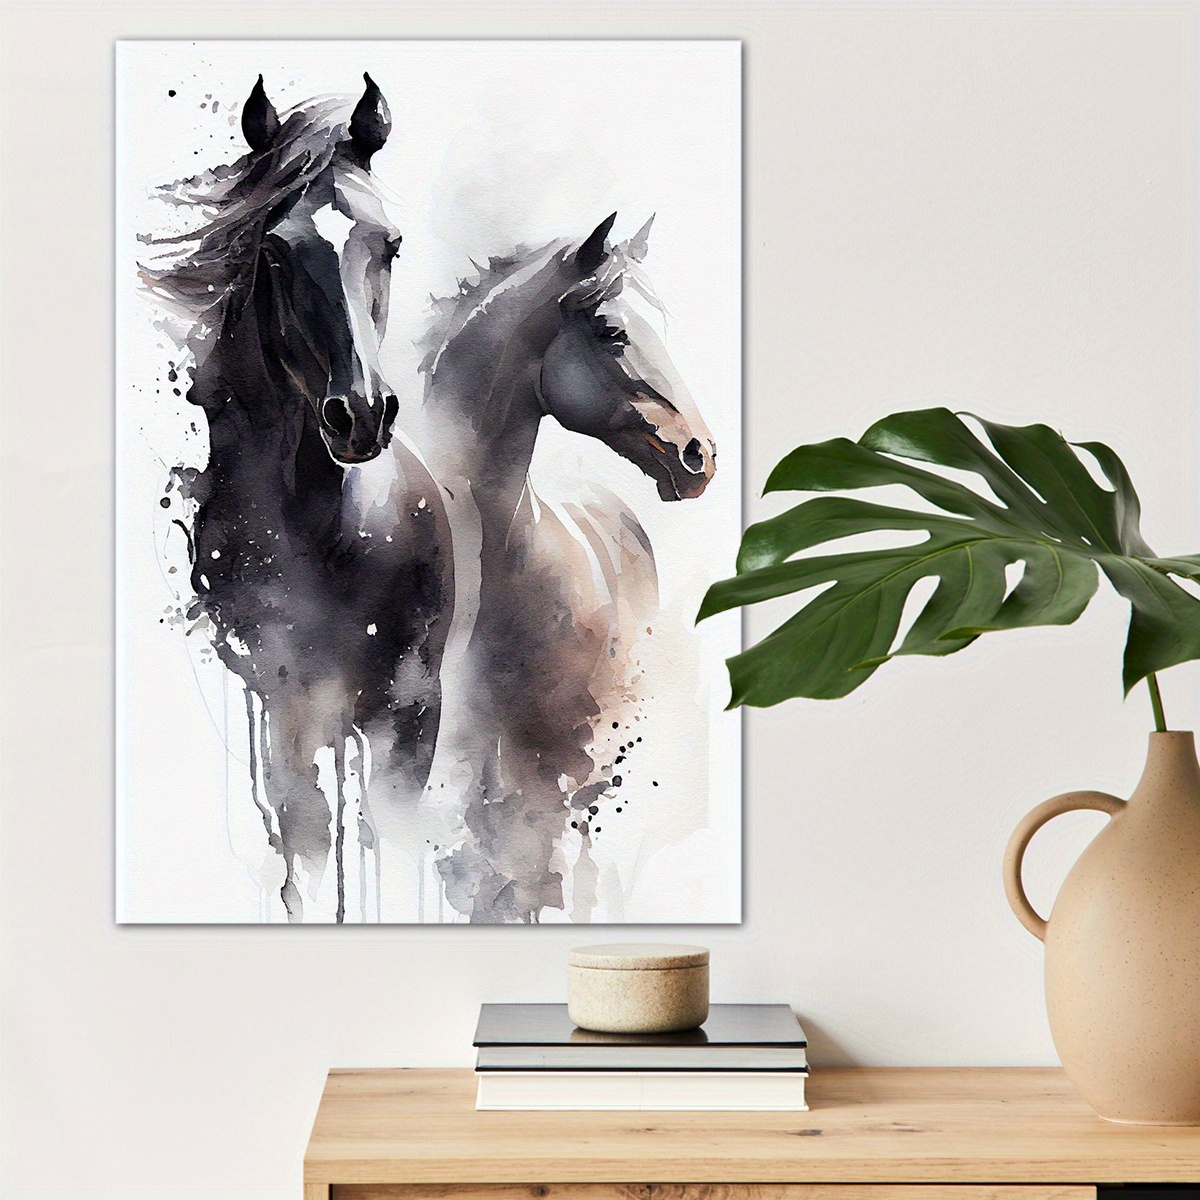 

1pc Horse Watercolor Canvas Wall Art For Home Decor, High Quality Wall Decor, Animal Canvas Prints For Living Room Bedroom Bathroom Kitchen Office Cafe Decor, Perfect Gift And Decoration